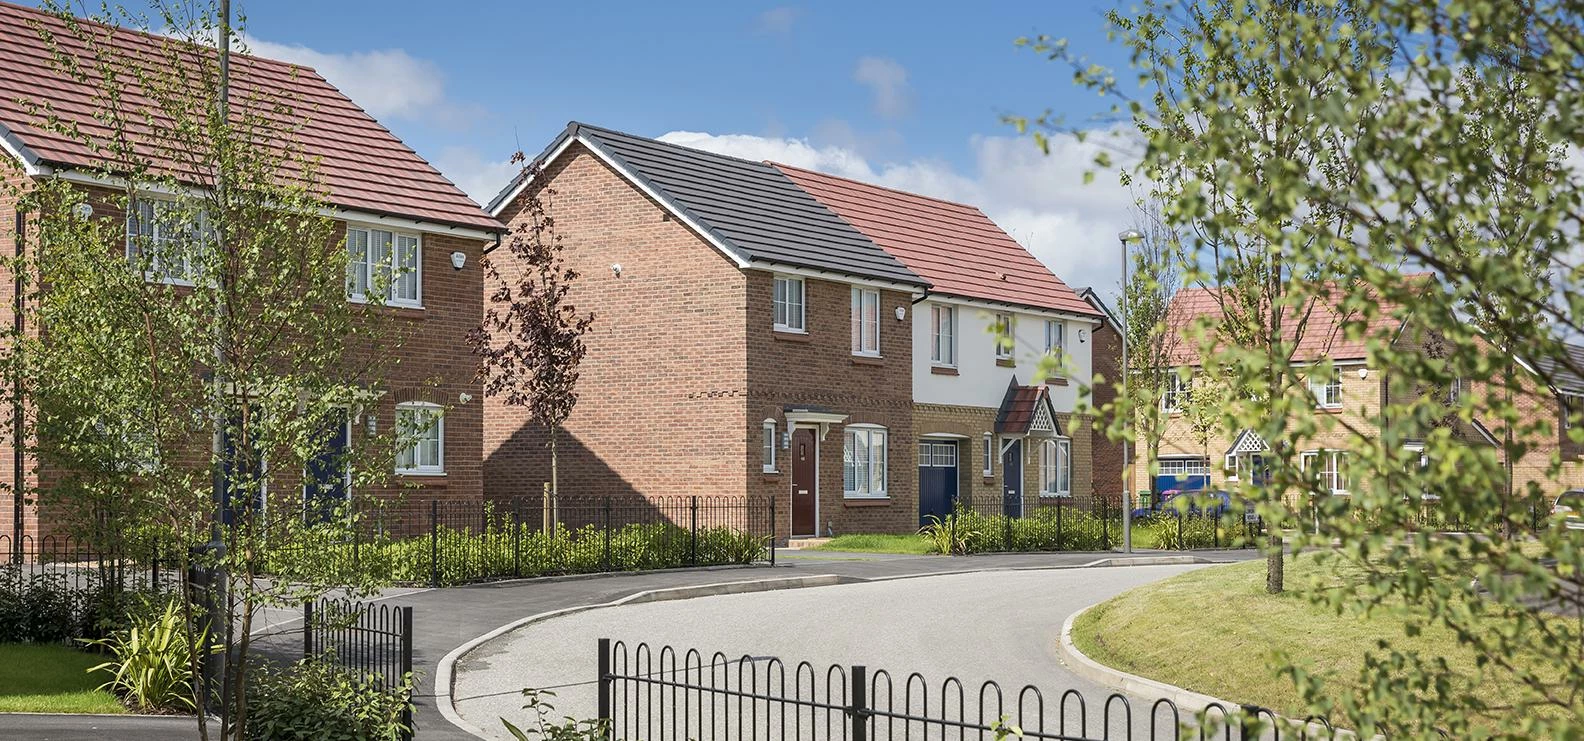 New homes in demand at NGV Liverpool! 